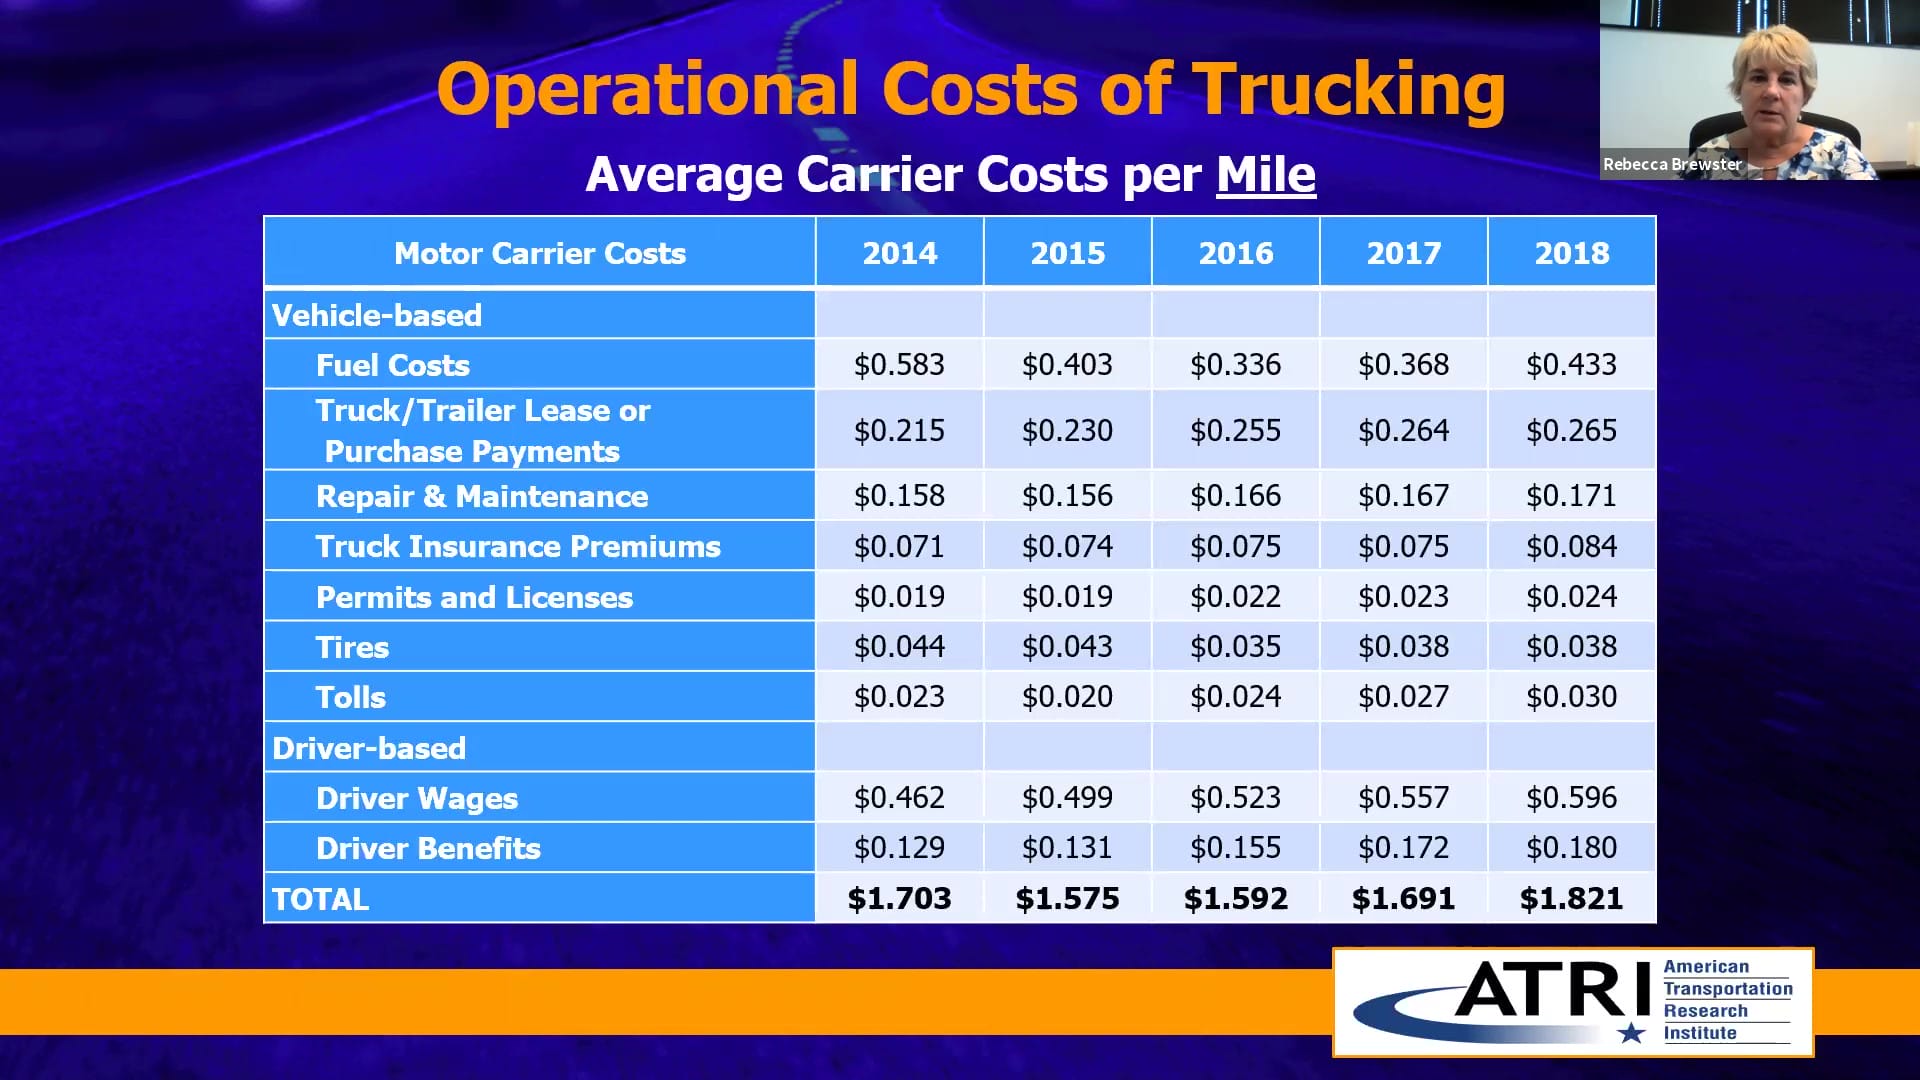 Trucking Industry Concerns 2020 from ATRI Operational Costs of Trucking Per Mile